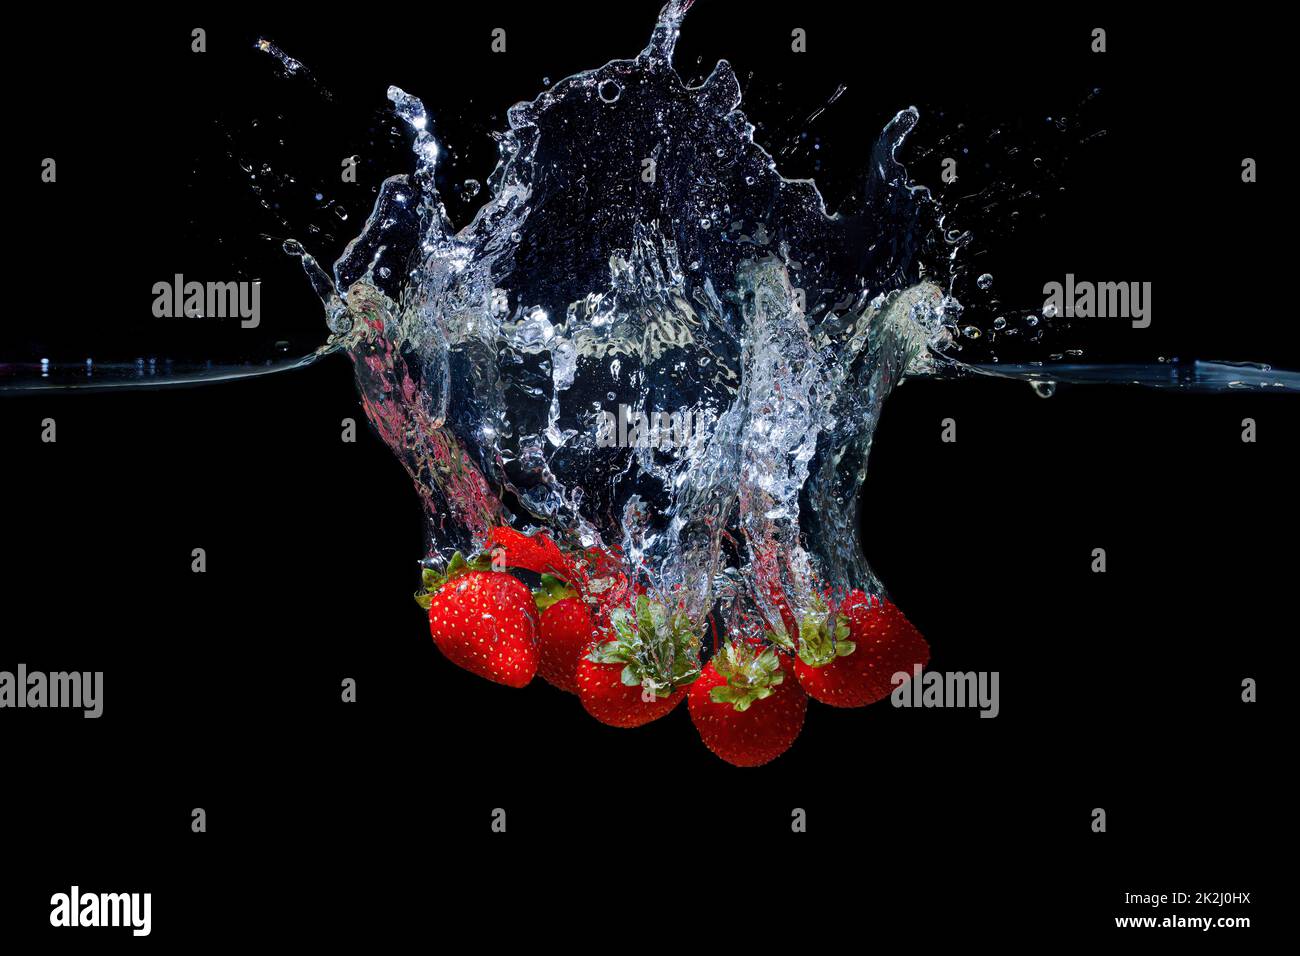 Bunch of fresh ripe strawberries dropped in water with splashes isolated on black background. Stock Photo